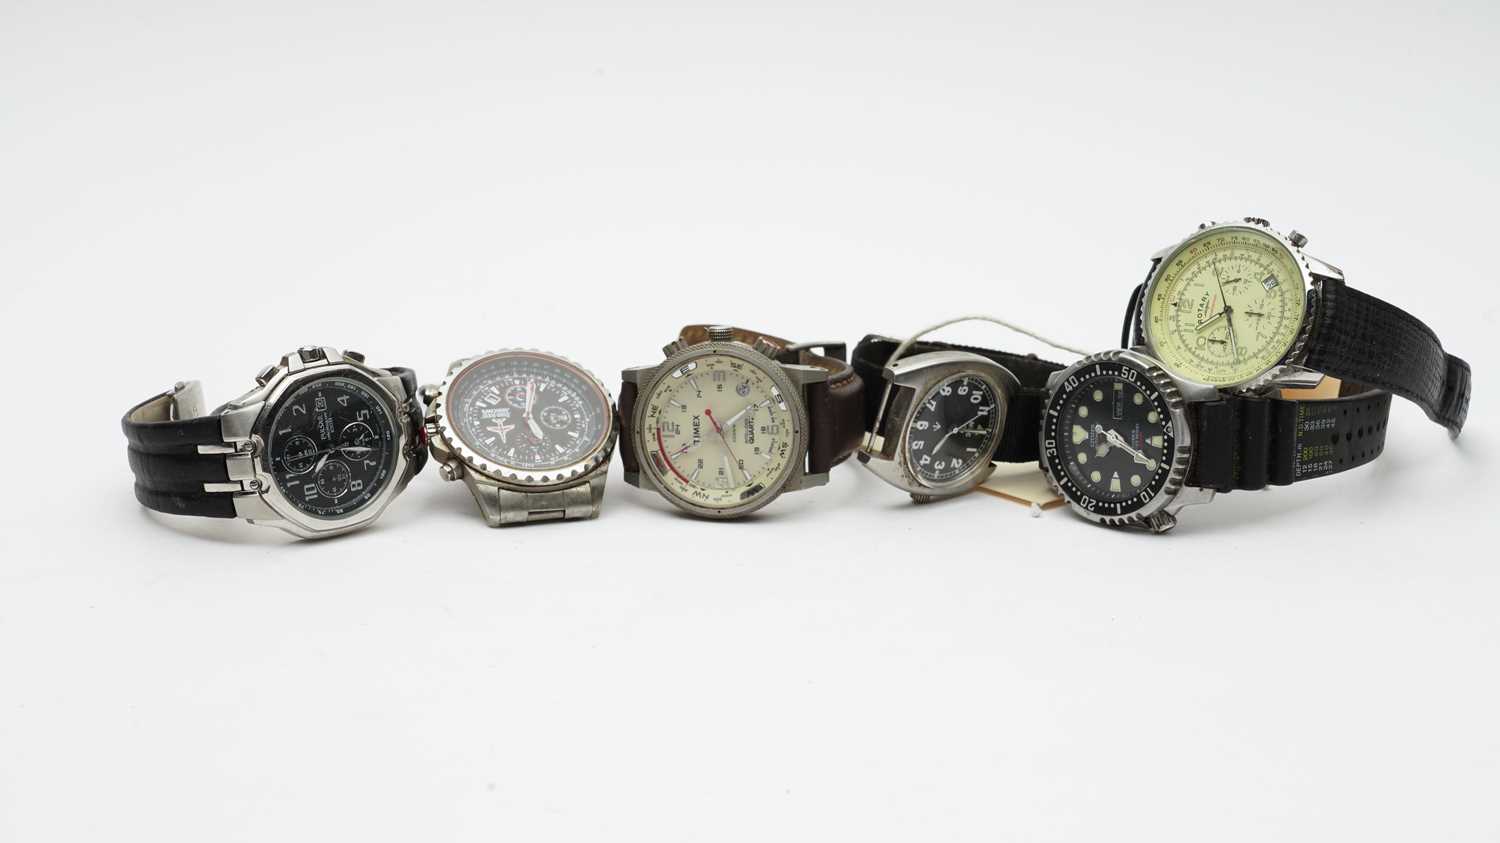 An MWC military steel cased wristwatch and others